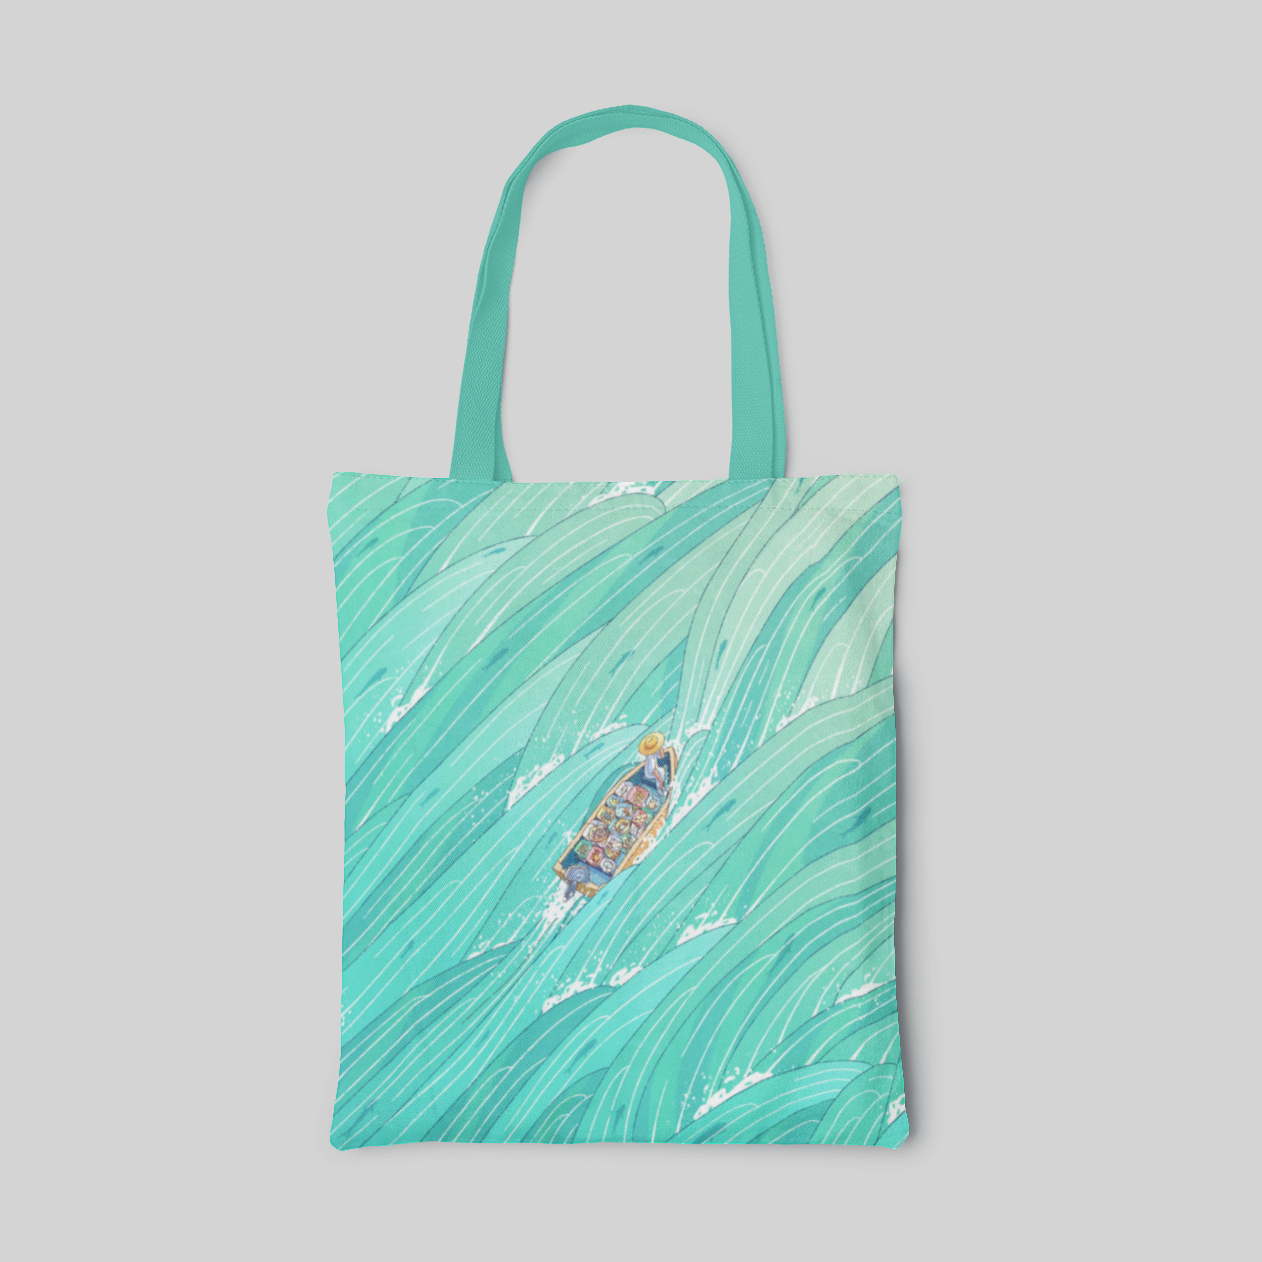 Tiffany green designed tote bag with fish boat sailing on the sea, front side